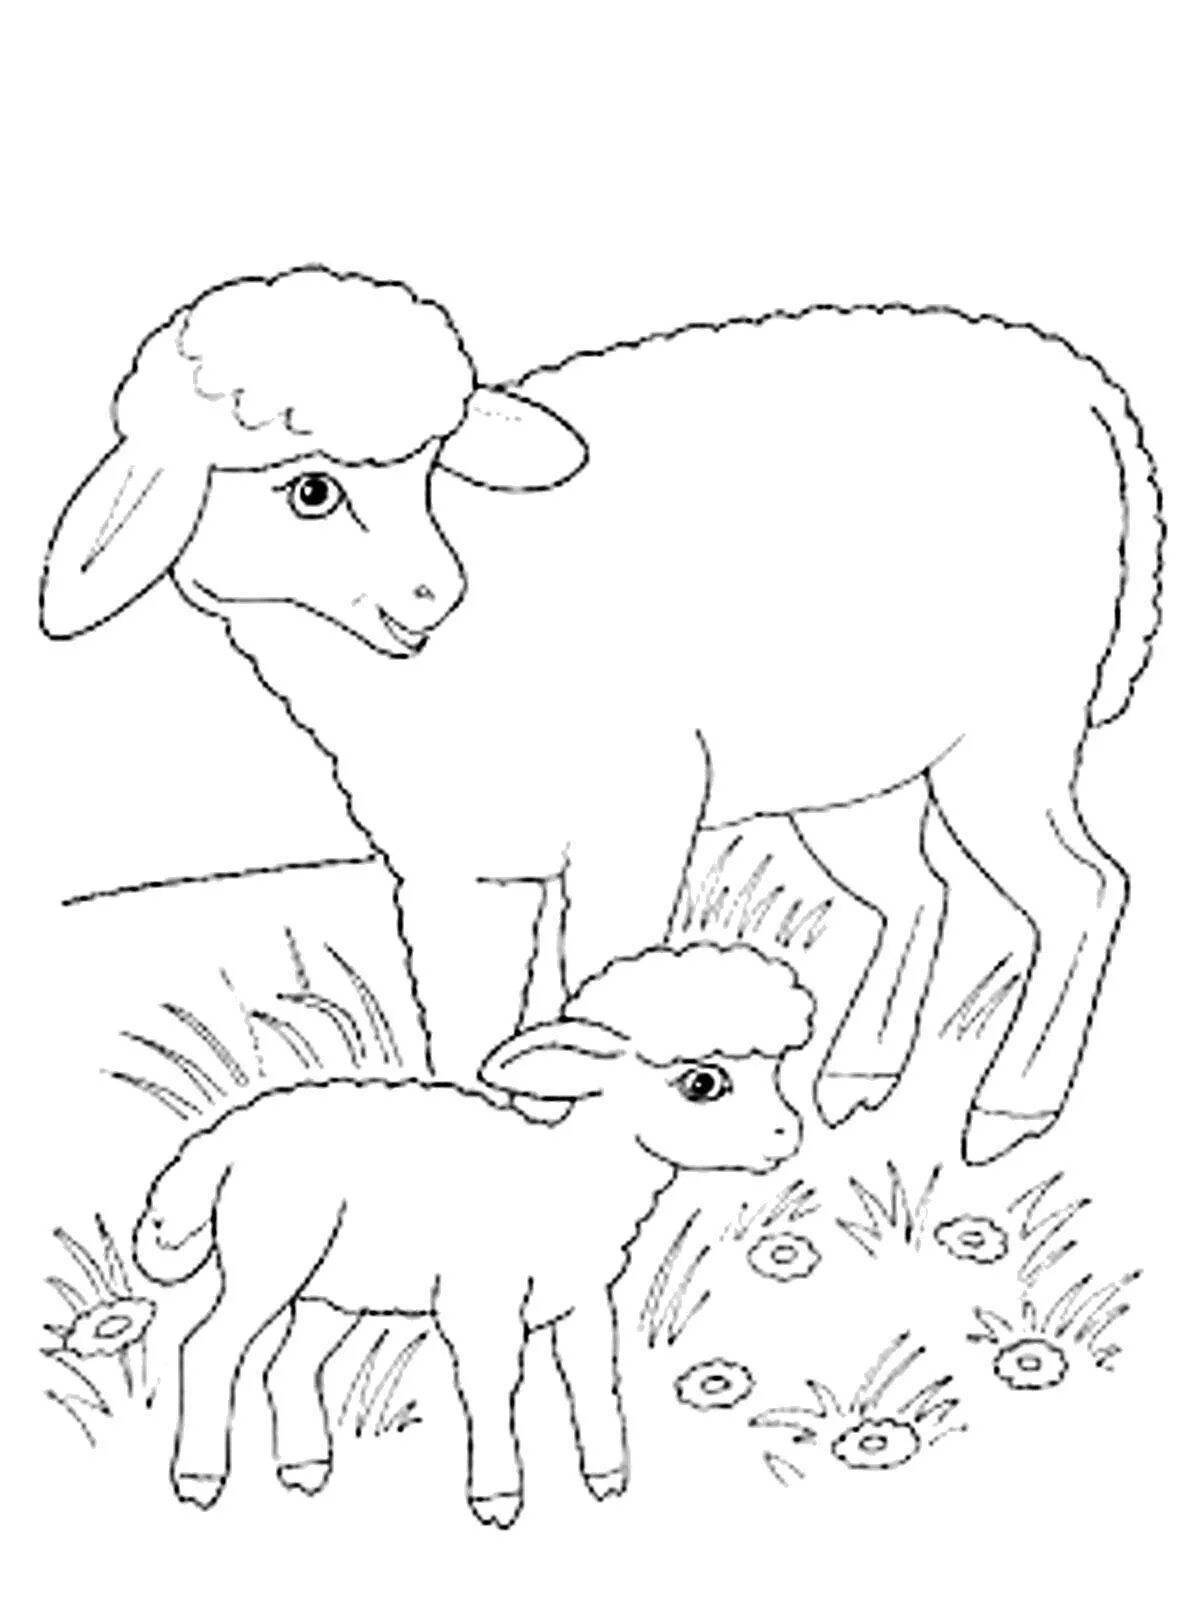 Snuggly coloring page lamb for kids